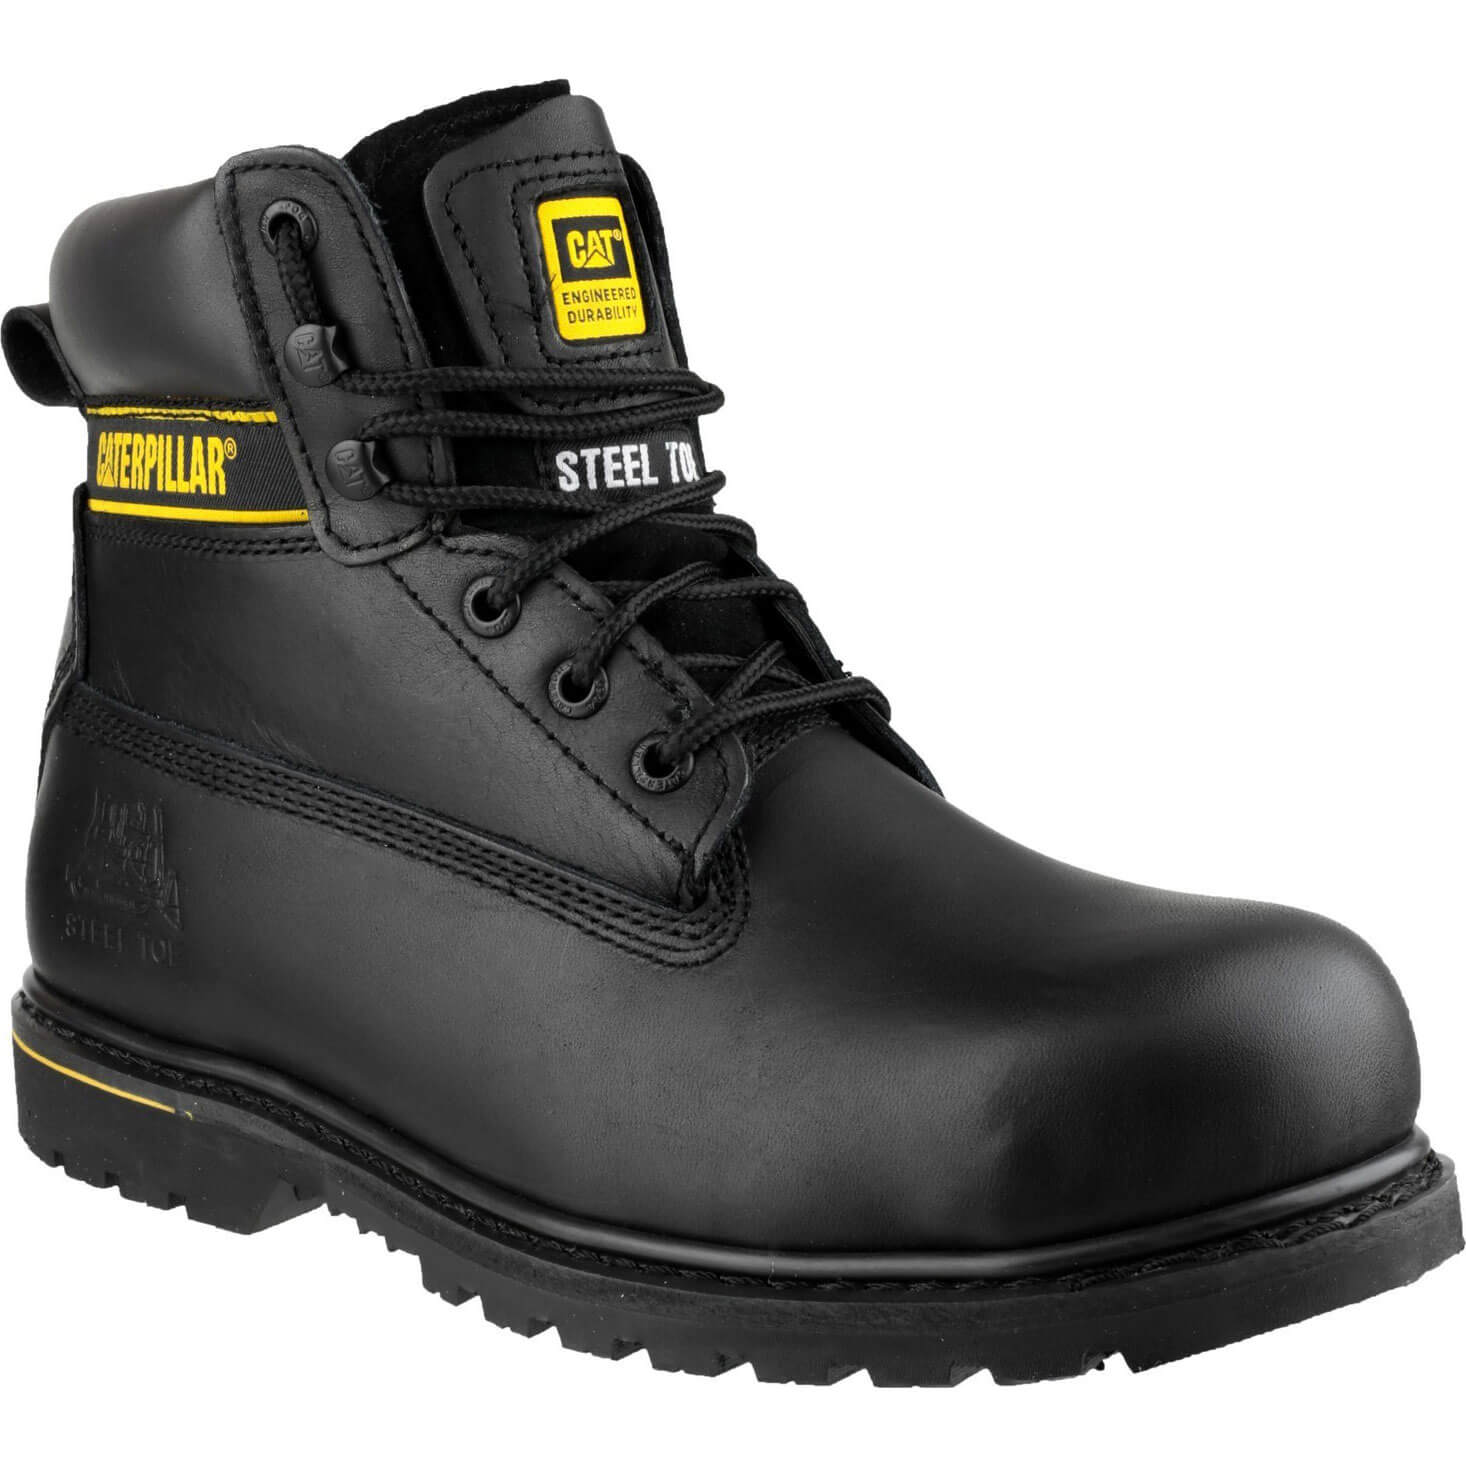 Caterpillar Mens Holton Safety Boots Black Size 12